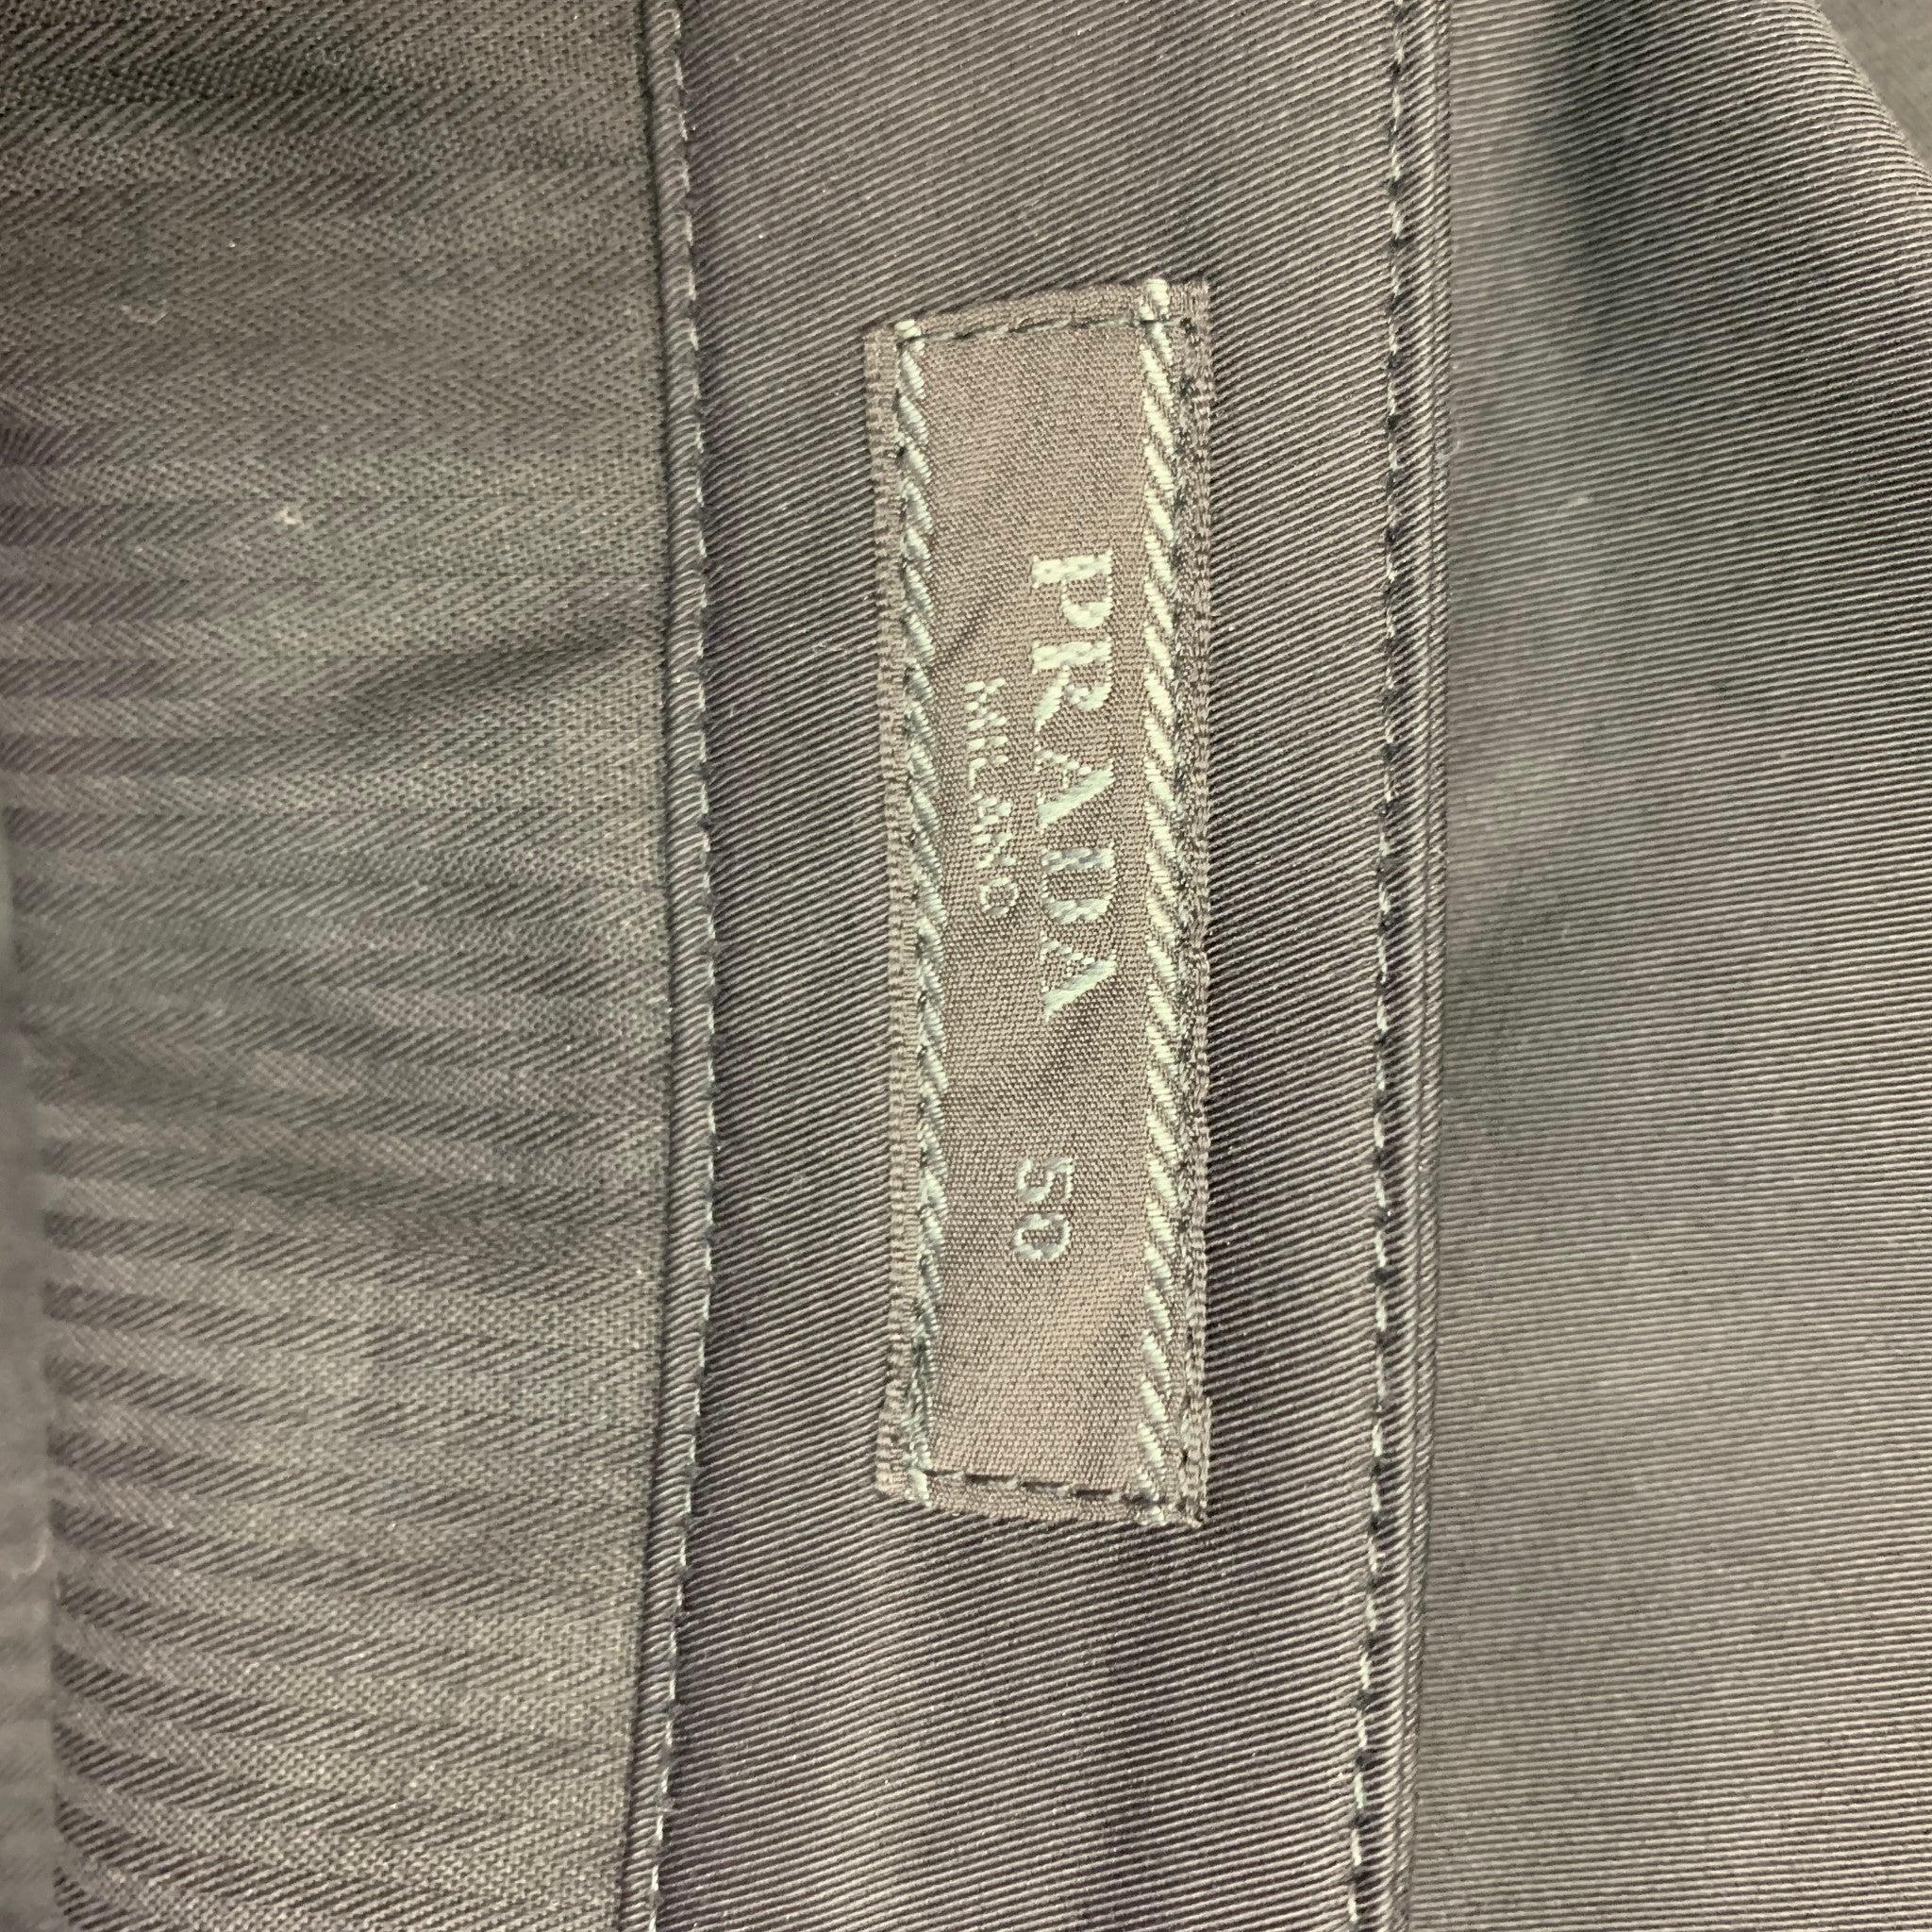 PRADA Size 34 Black Solid Cotton / Elastane Zip Fly Dress Pants In Excellent Condition For Sale In San Francisco, CA